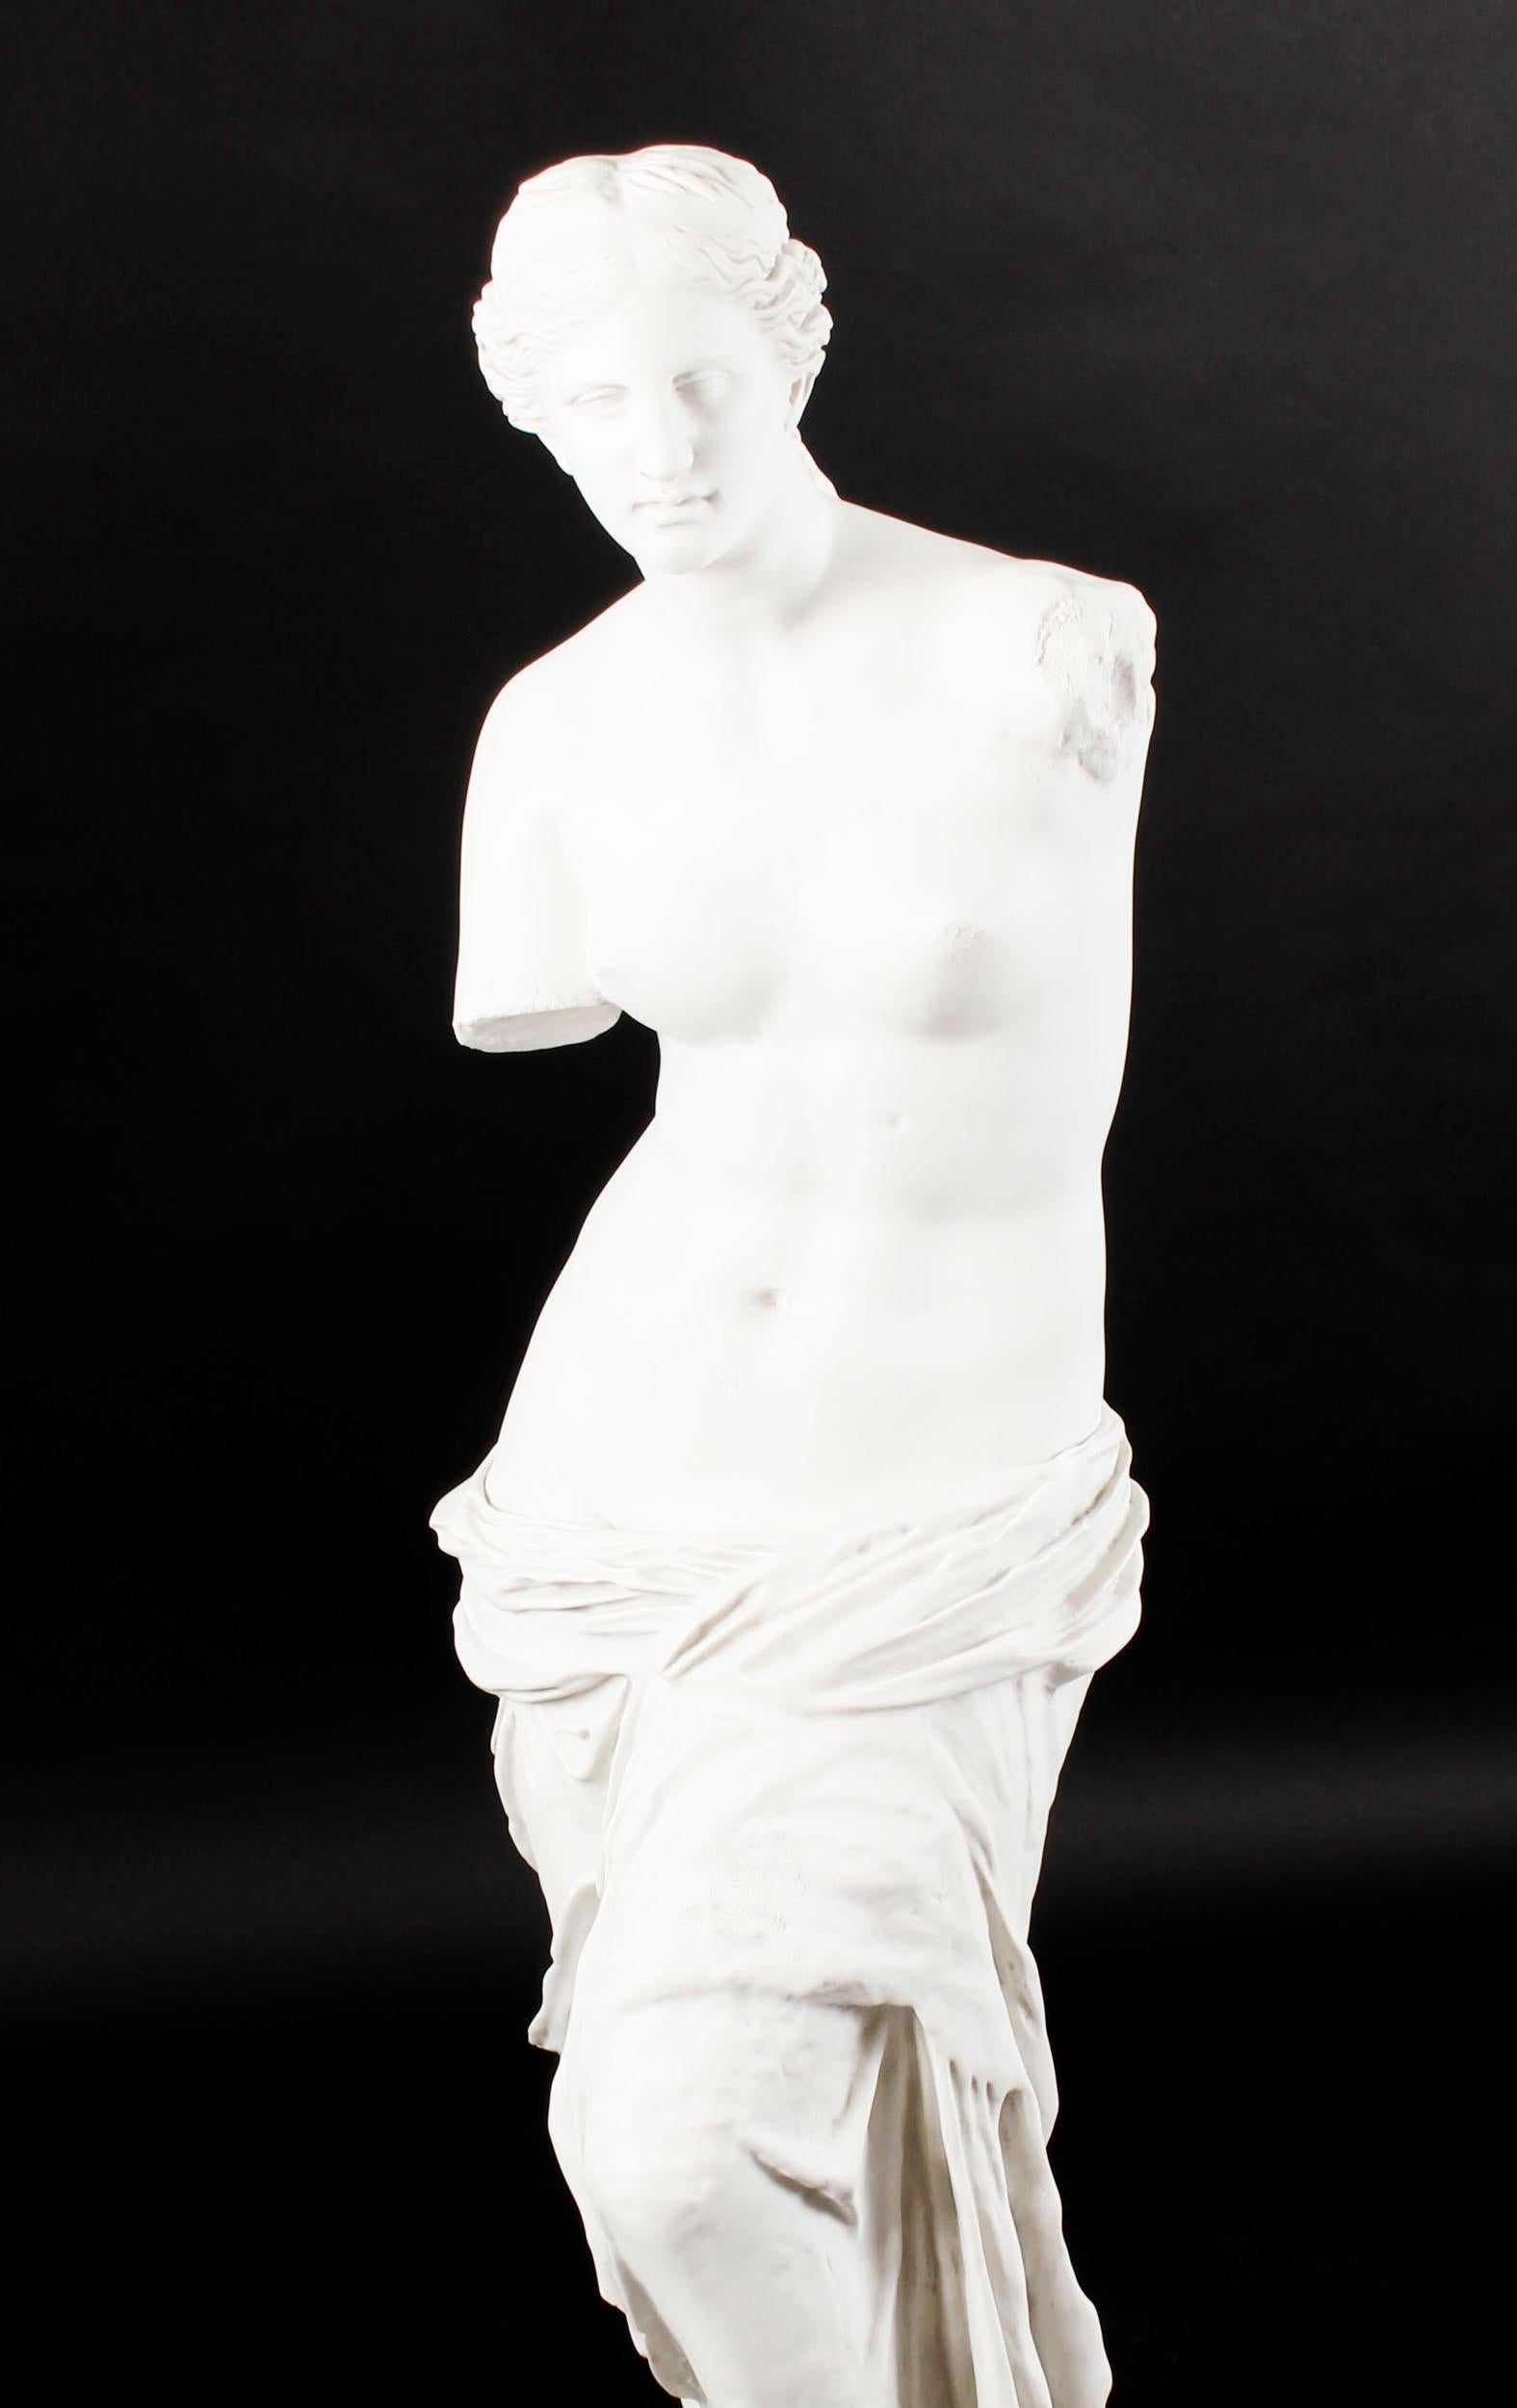 This is an excellently sculpted composite marble statue of the famous ancient Greek statue, Venus de Milo, late 20th century in date. 

As exactly in the original sculpture by Alexandros of Antioch, here the Goddess of beauty and love embodies the